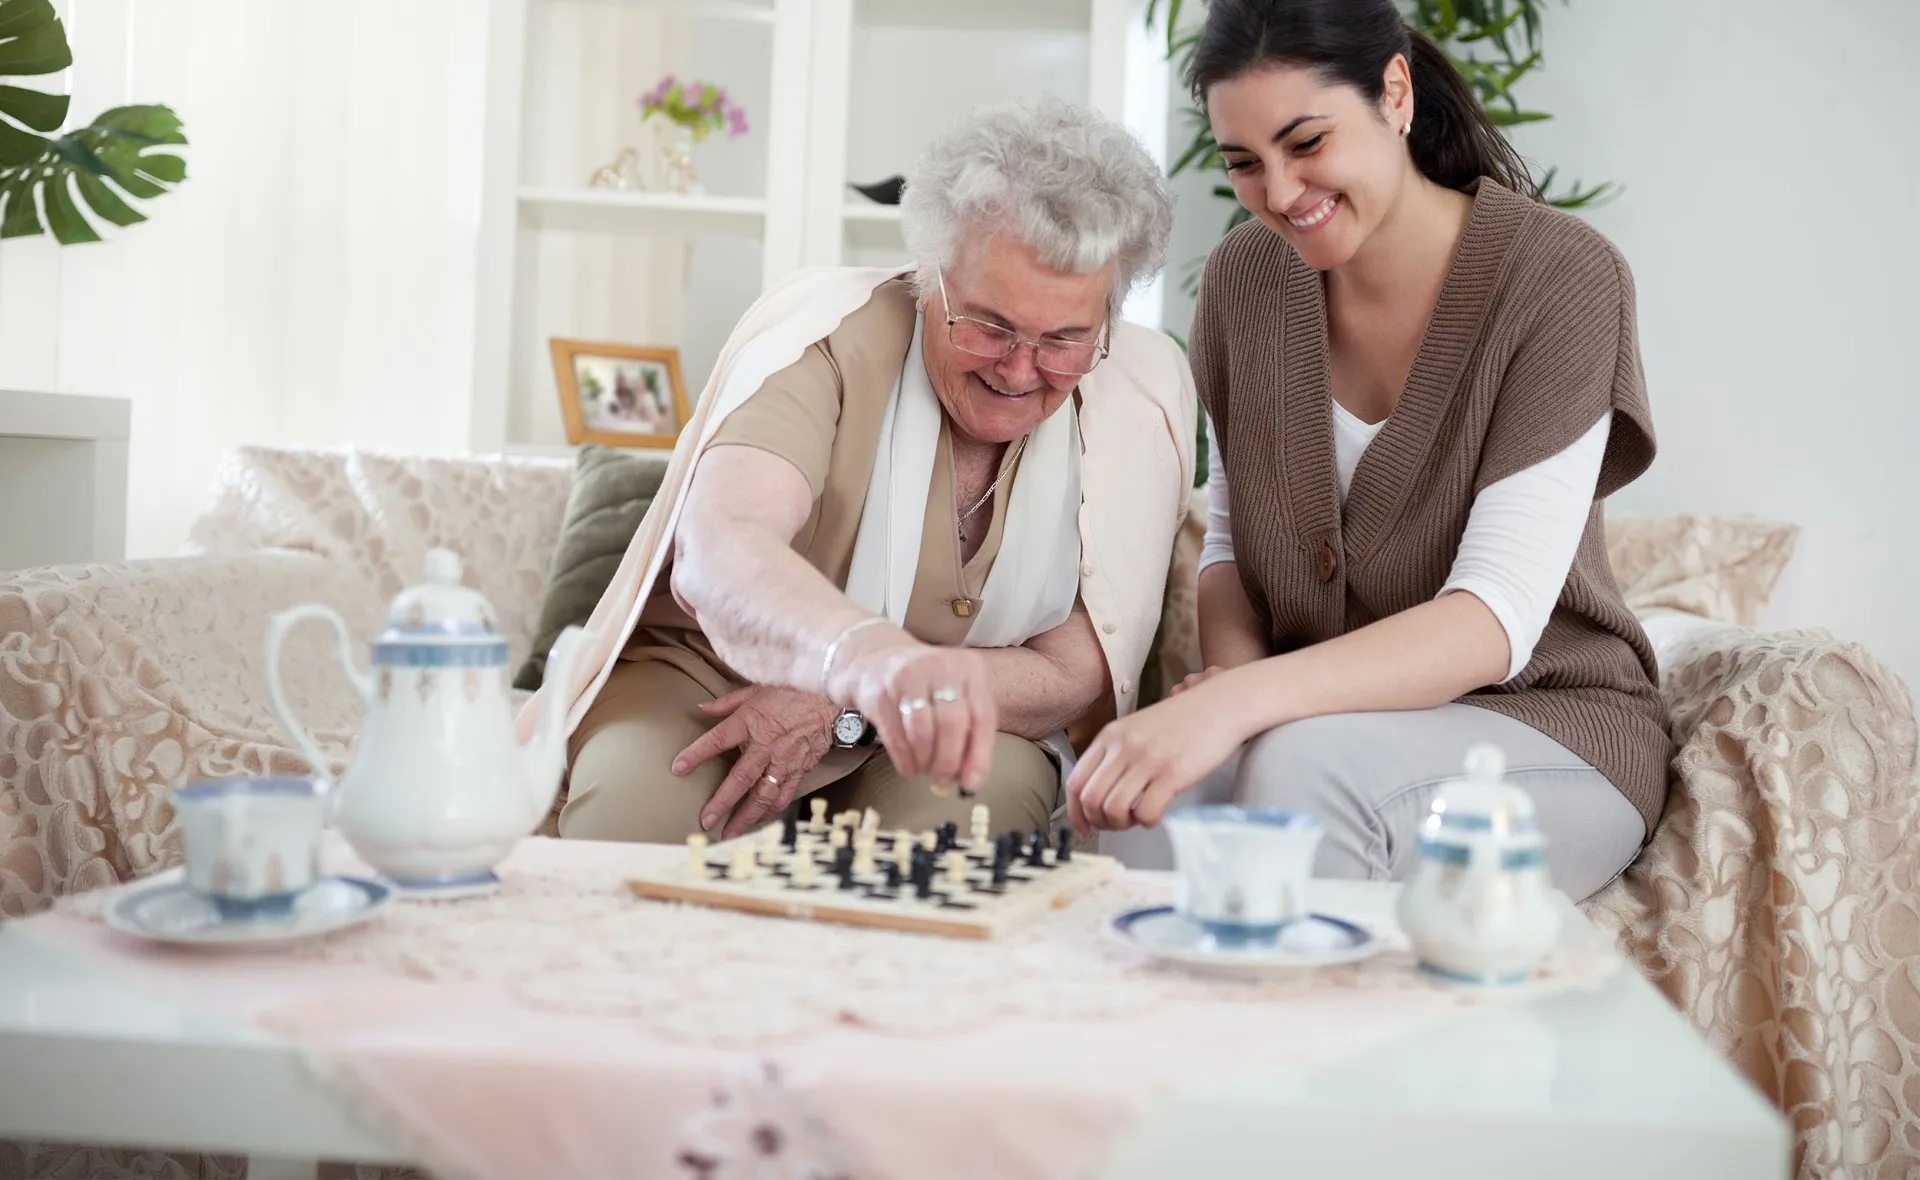 Marigoldcare. Elder care services for your loved one. Companion care and personal care.